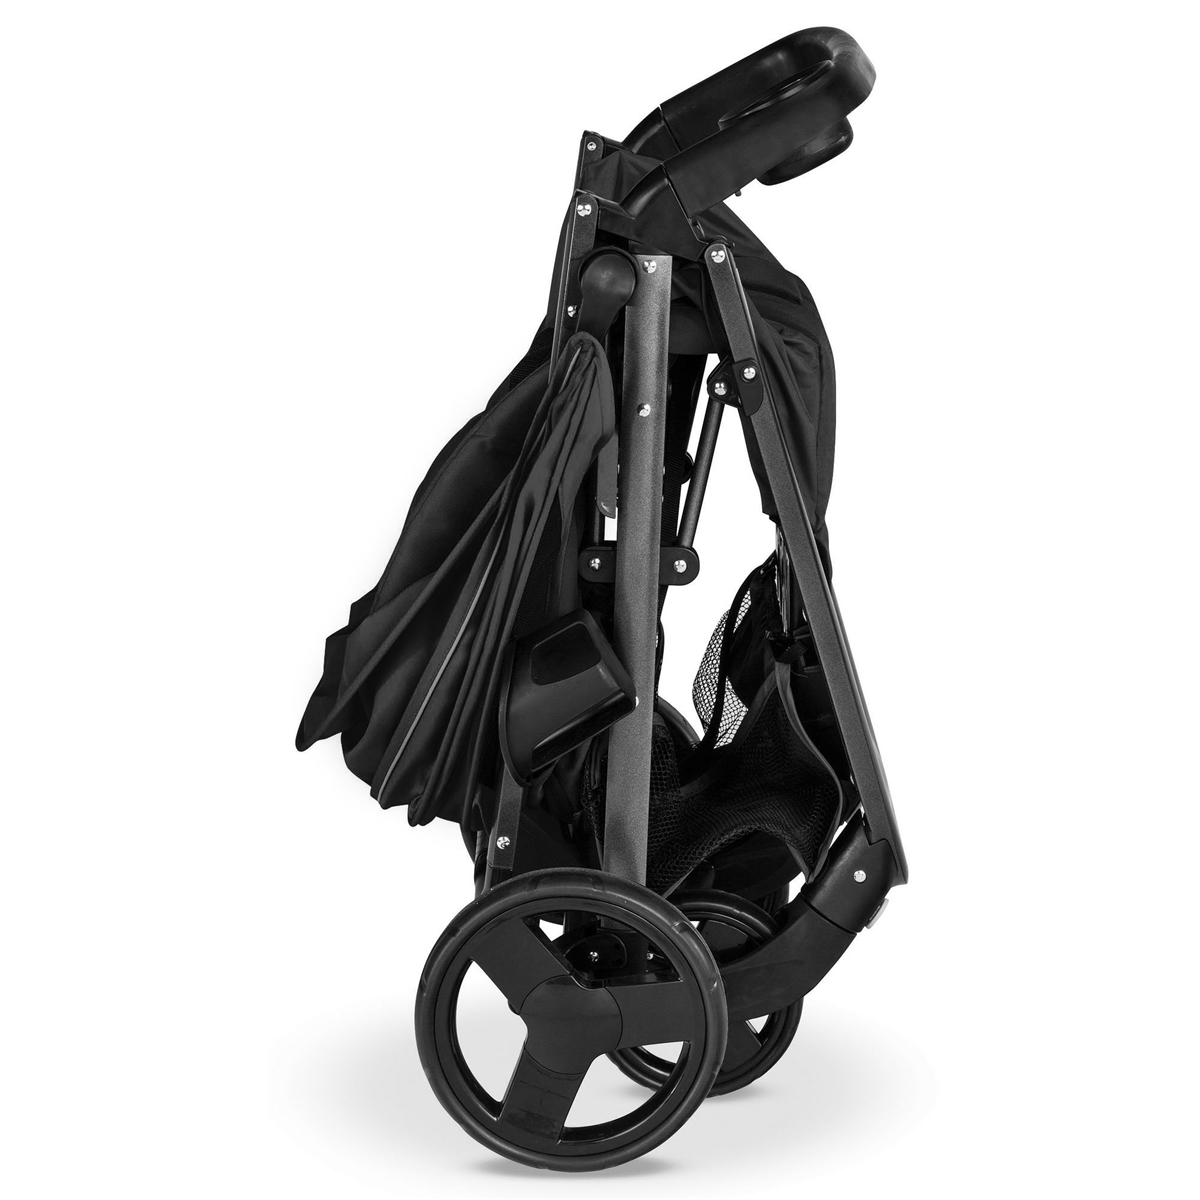 combi stroller fold sling and go